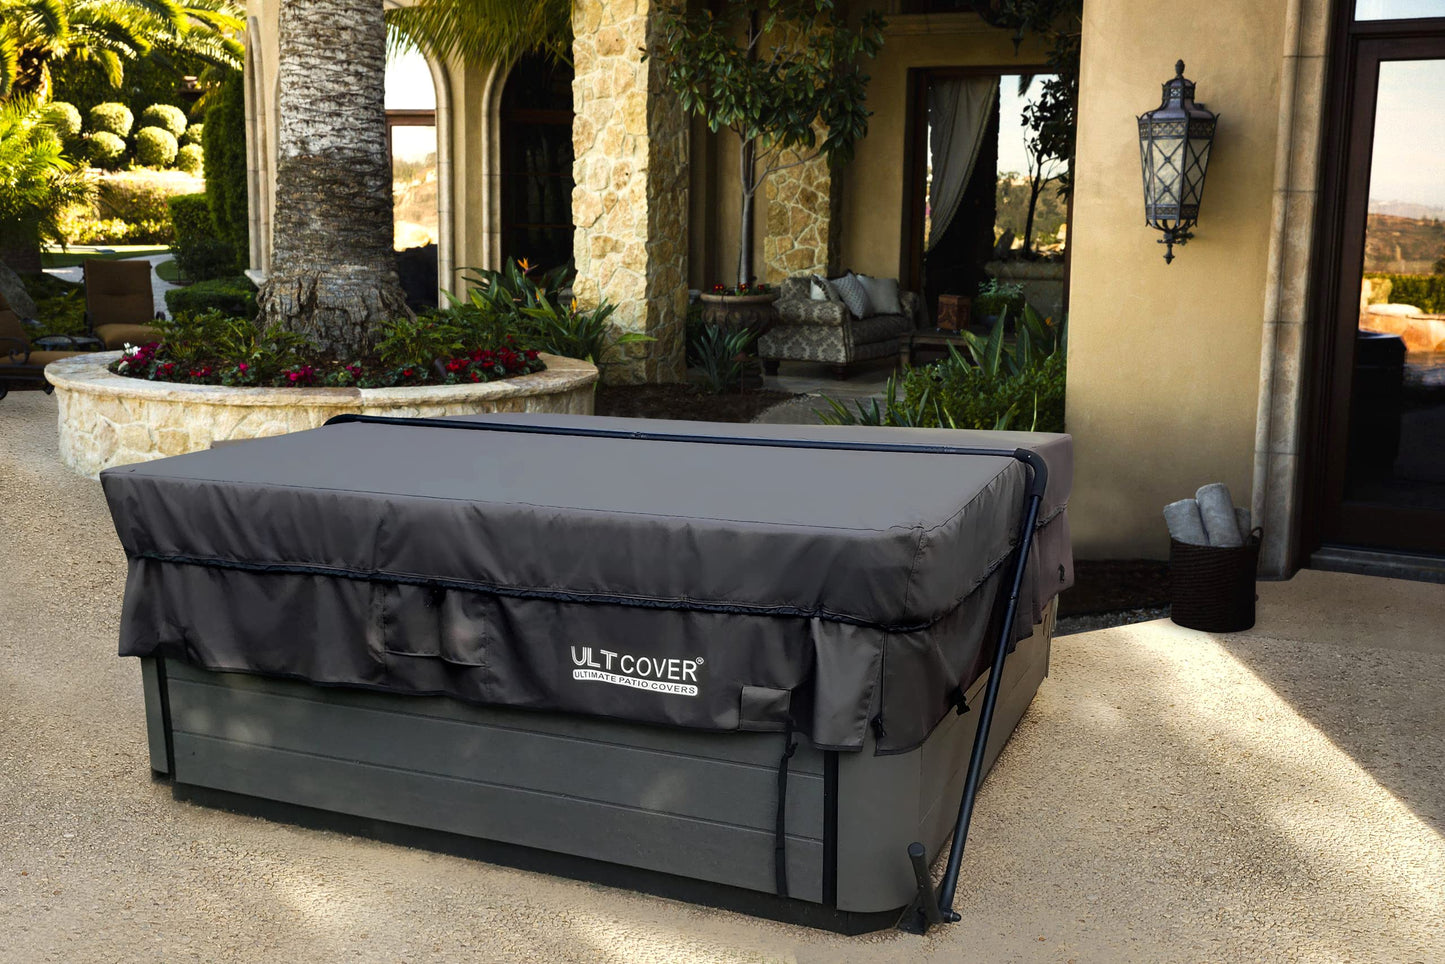 ULTCOVER Waterproof 600D Polyester Square Hot Tub Cover Outdoor SPA Covers 85 x 85 inch, Black